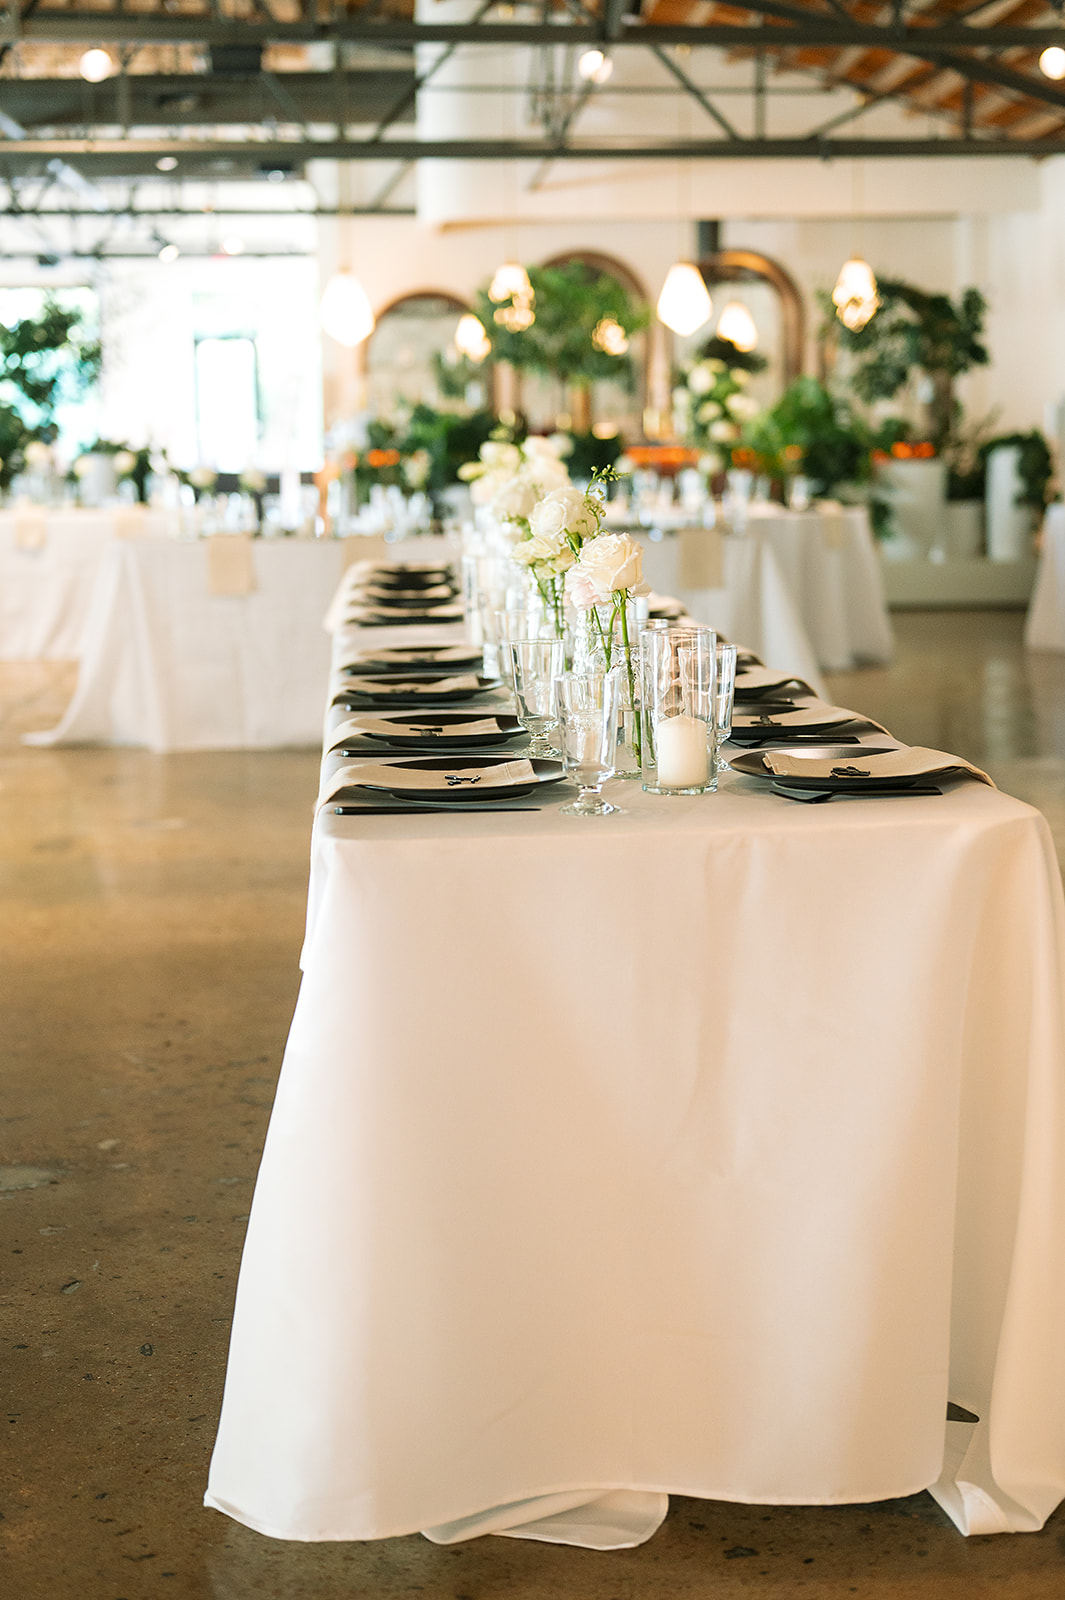 Details of the reception table setup with white flowers and linens at Saint Elle wedding venue